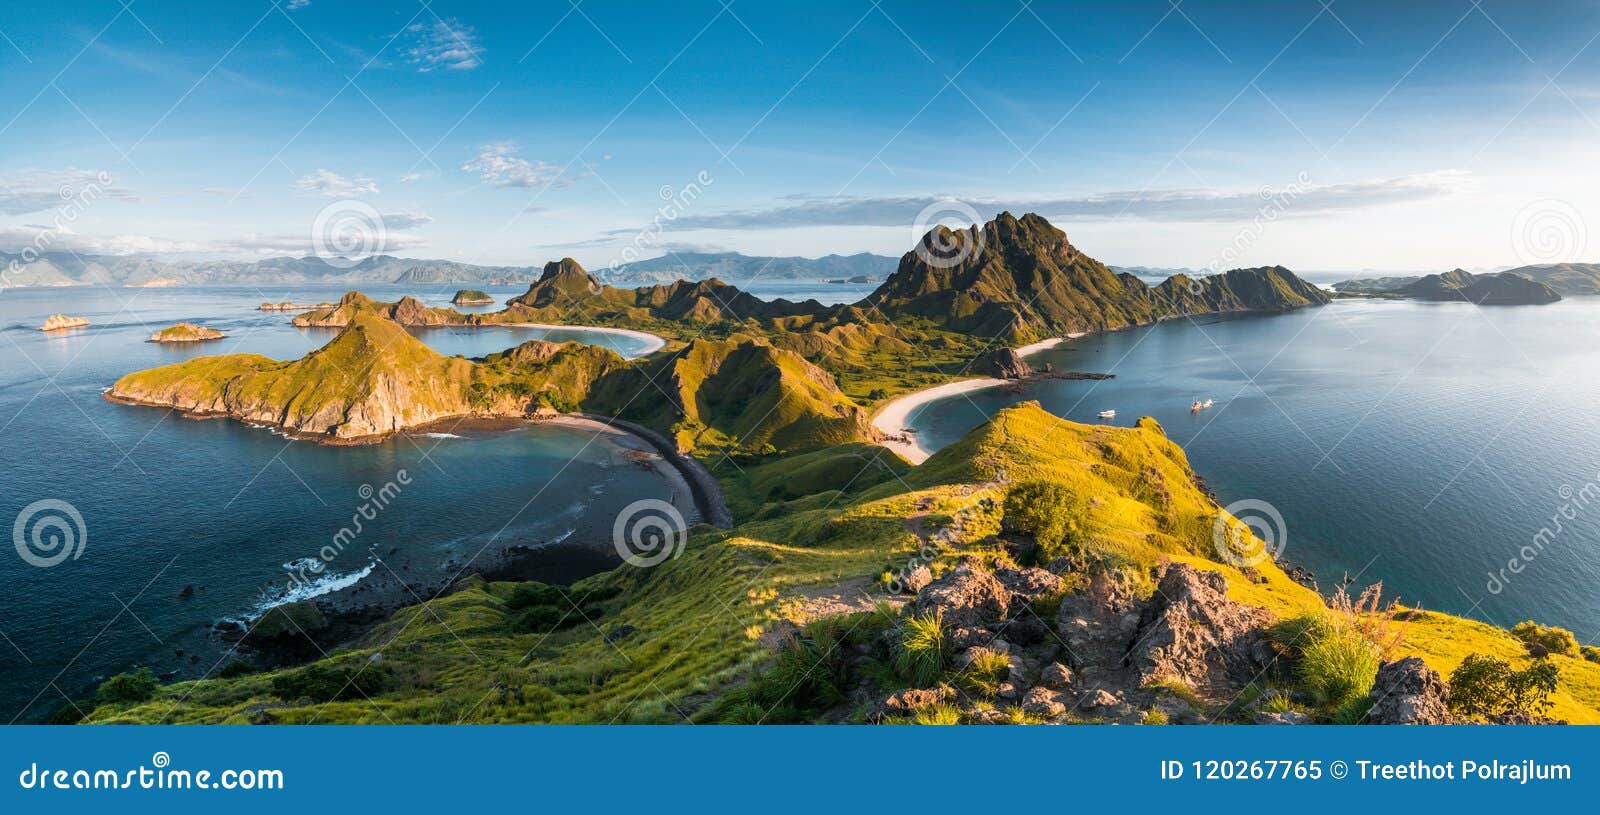 top view of padar island in a morning from komodo island